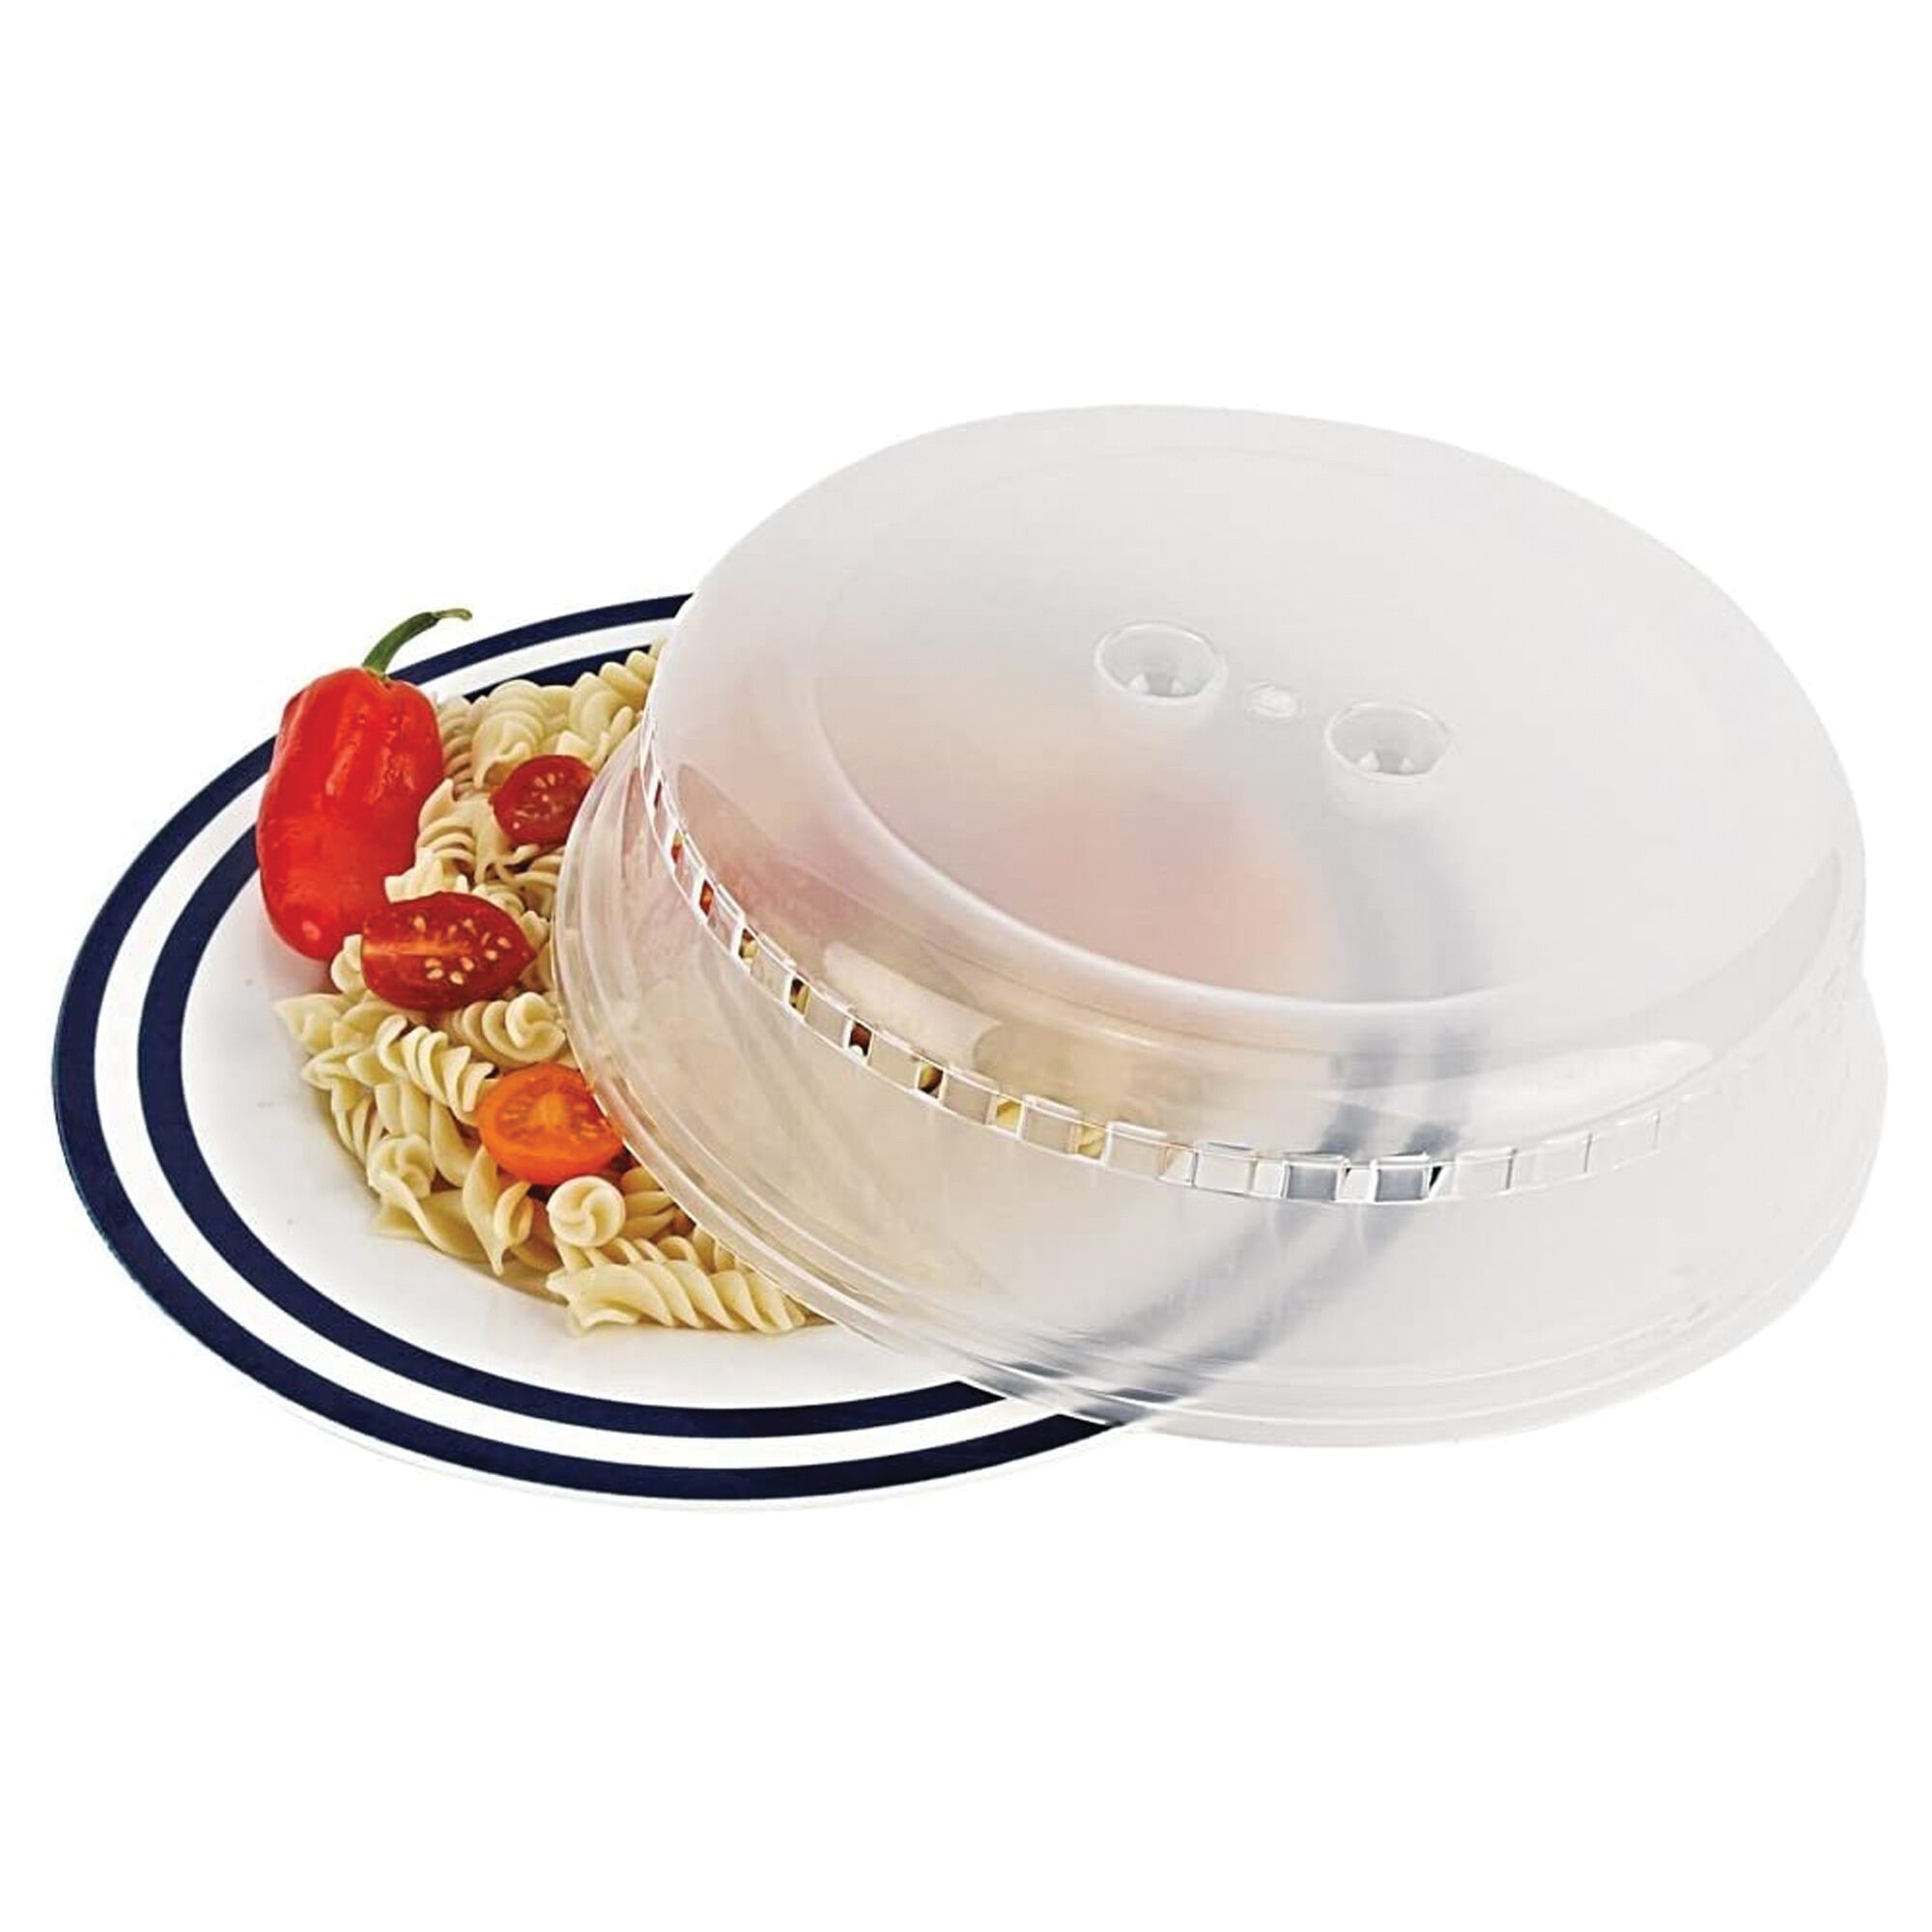 Tovolo Microwave Collapsible Food Cover 3-Pack Multisize Plastic Bpa-free  Reusable Collapsible Bowls